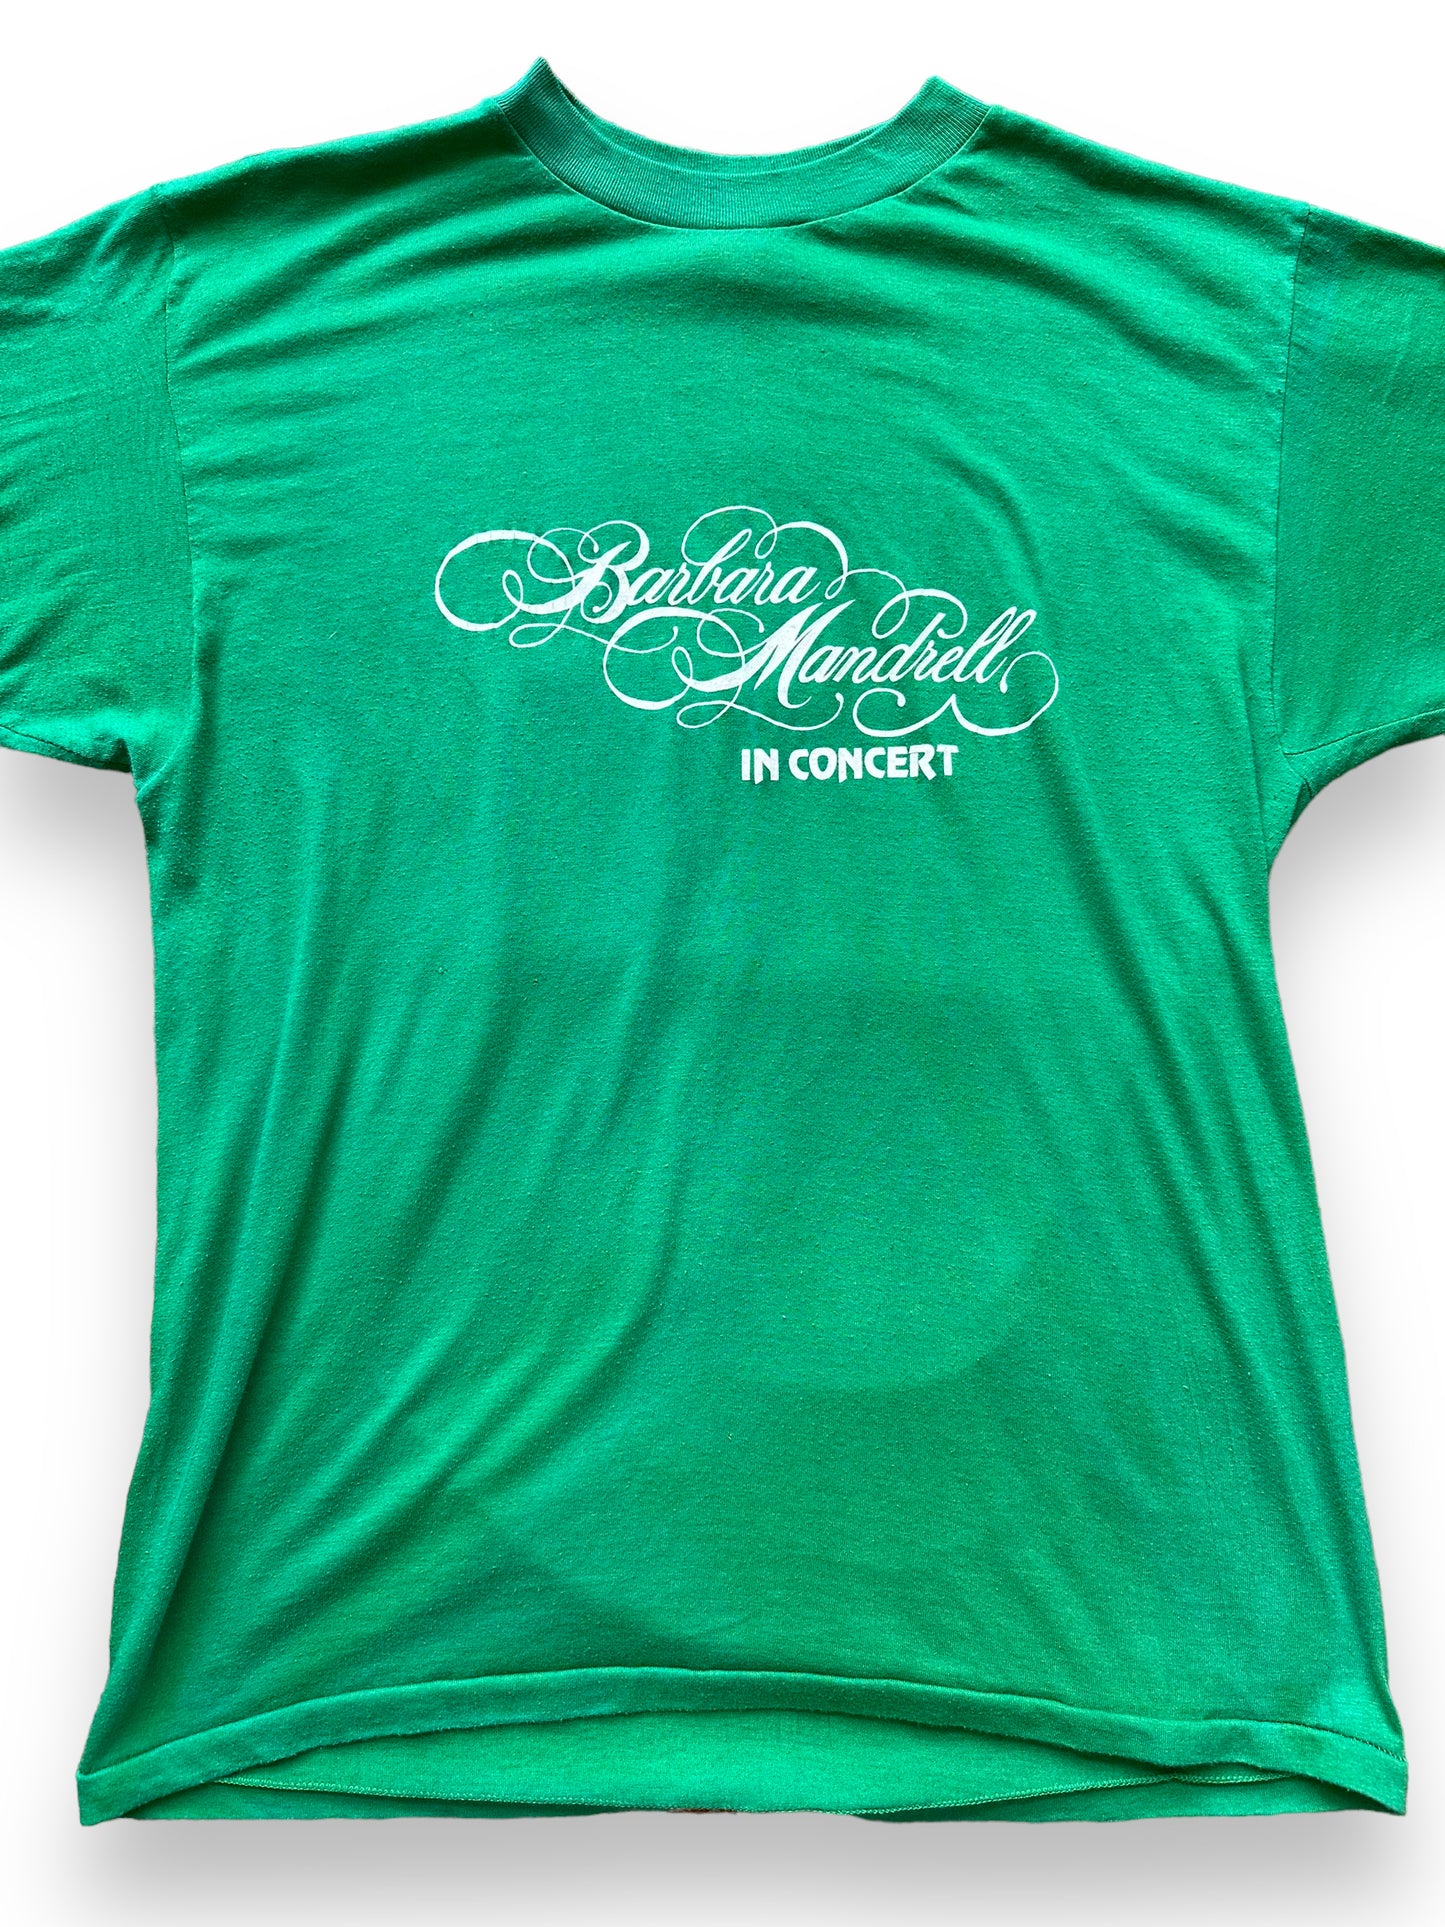 Front Detail on Vintage Green Barbara Mandrell Tee SZ XL | Vintage Country Music Tees Seattle | Barn Owl Vintage Goods